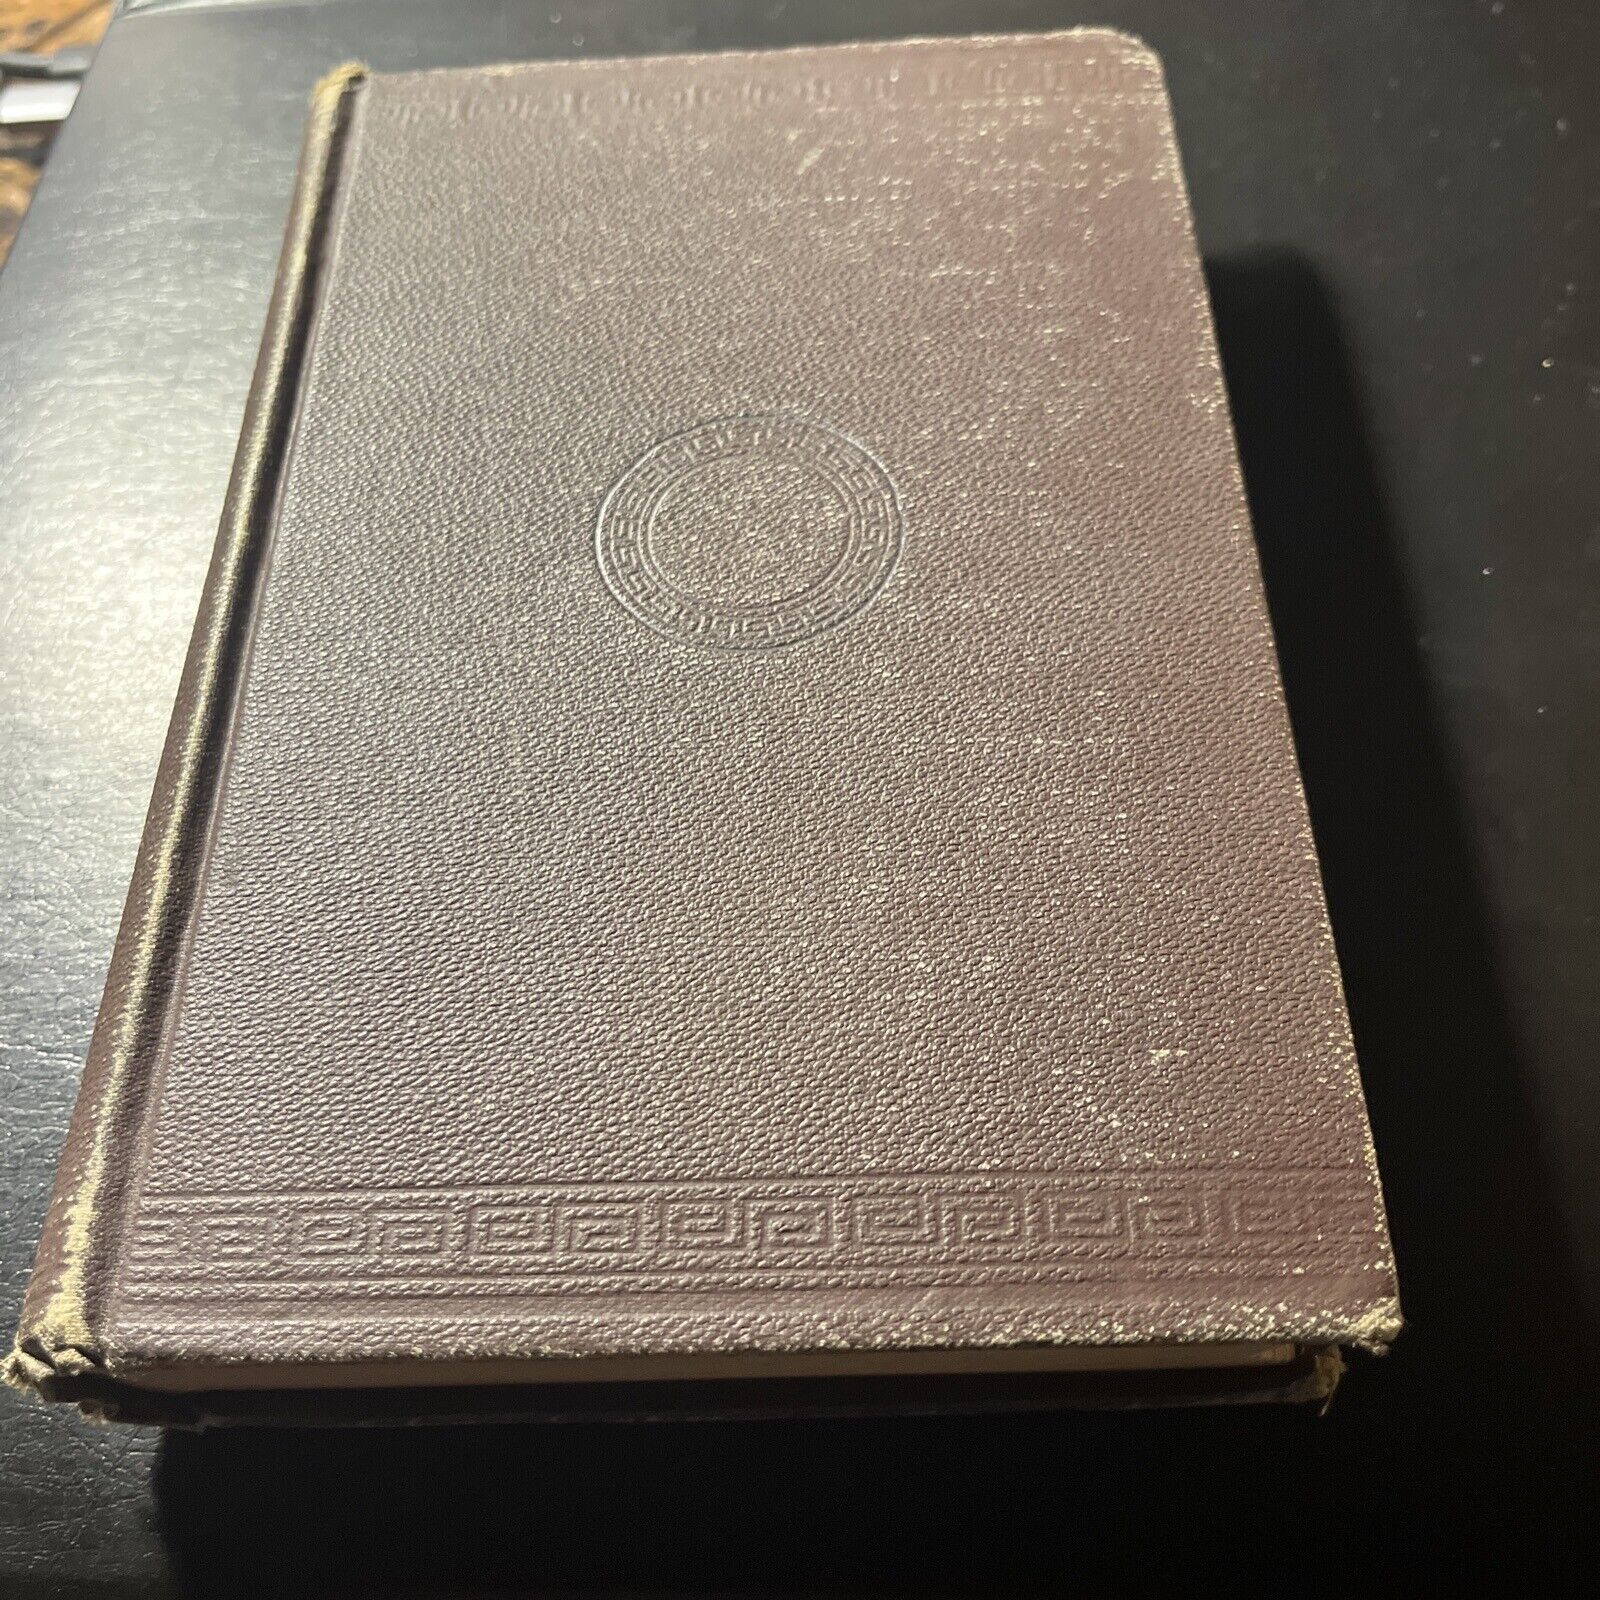 1884 Issue Of History Of The Christian Church By Leonard Nice